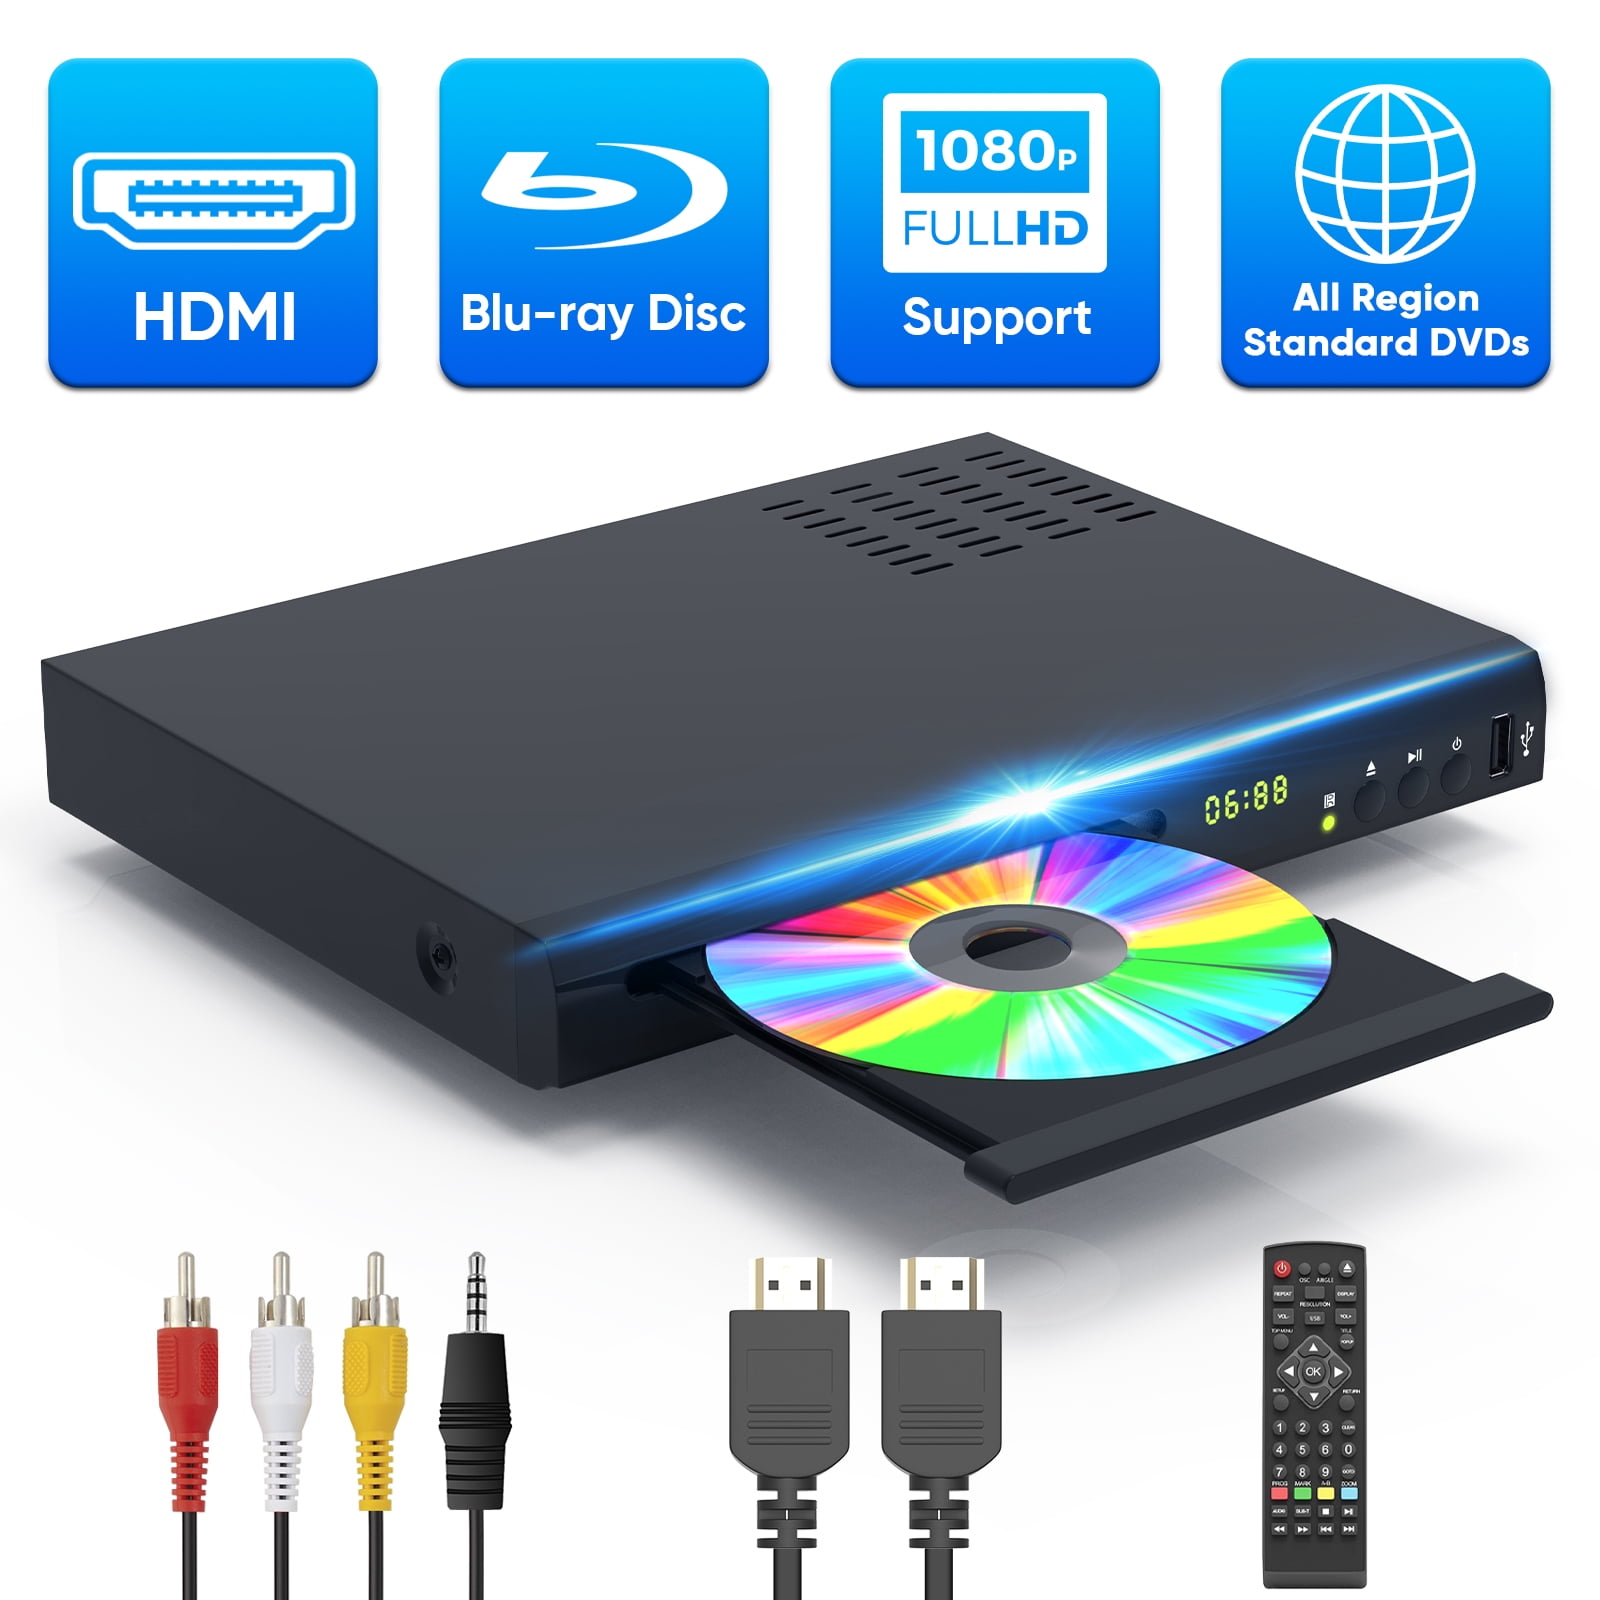 Blu-Ray DVD Player for TV, HD 1080P Players with HDMI/AV/Coaxial/USB Ports,  Supports All DVDs and Region A/1 Blue Ray, Built-in PAL/NTSC System